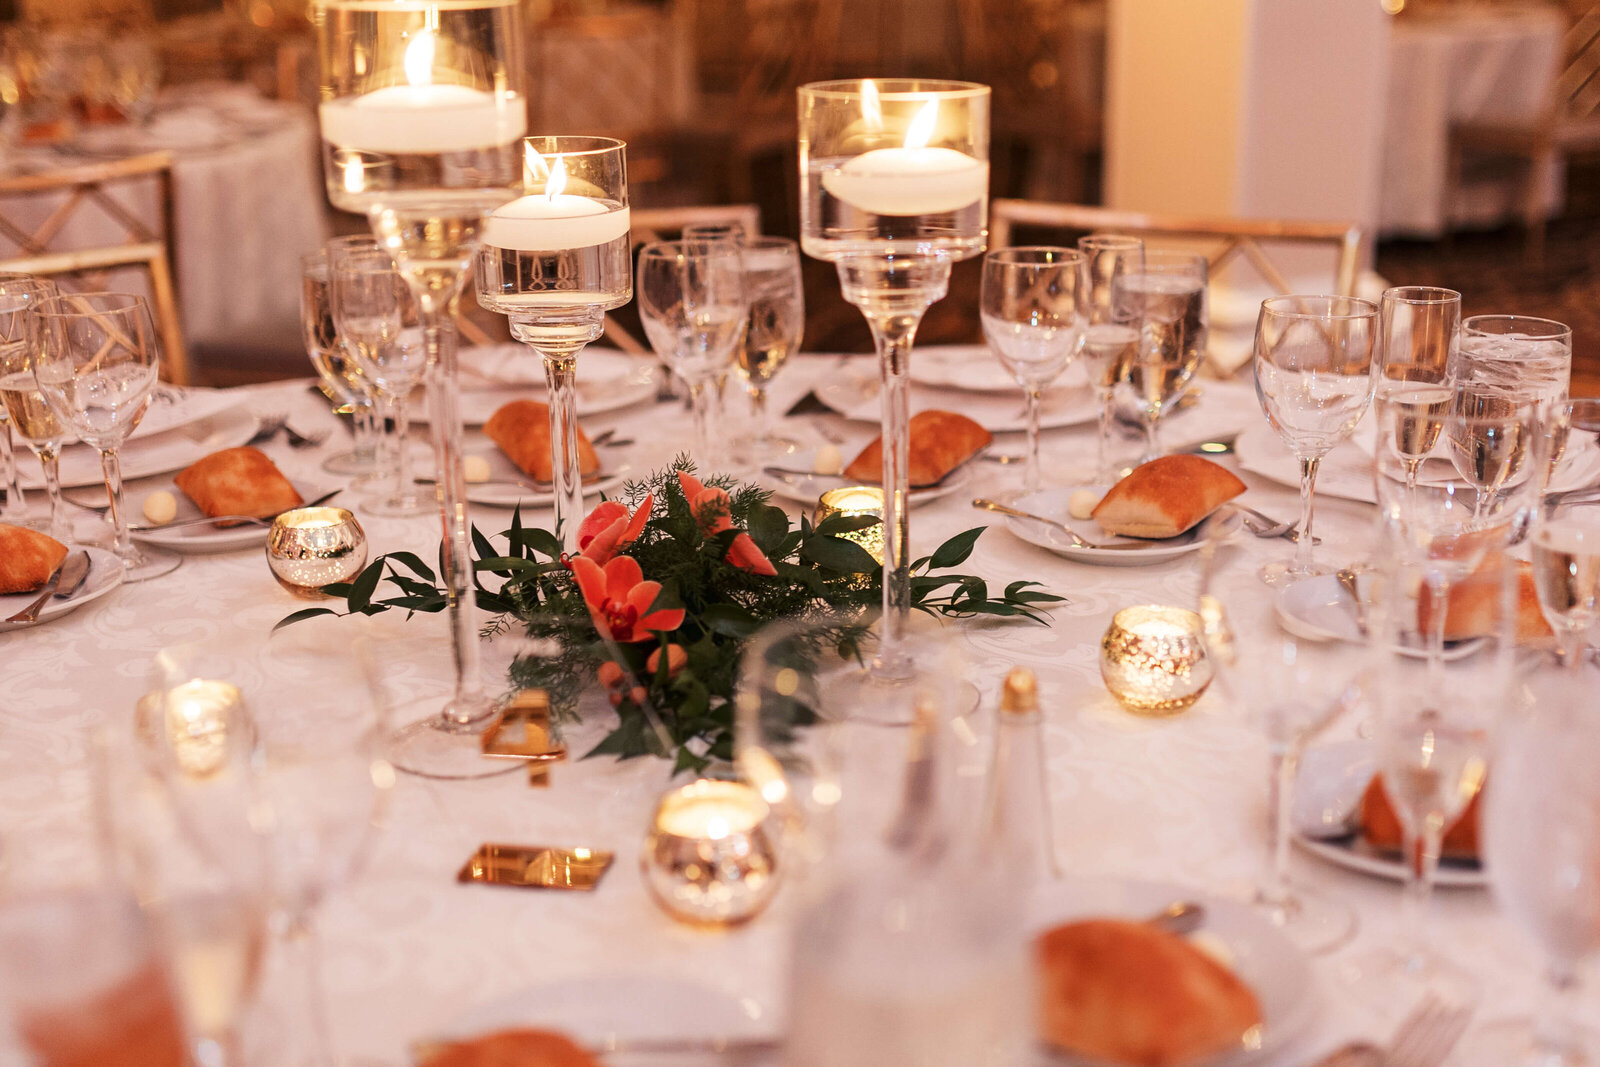 Floral table centerpieces surrounded by floating candles,